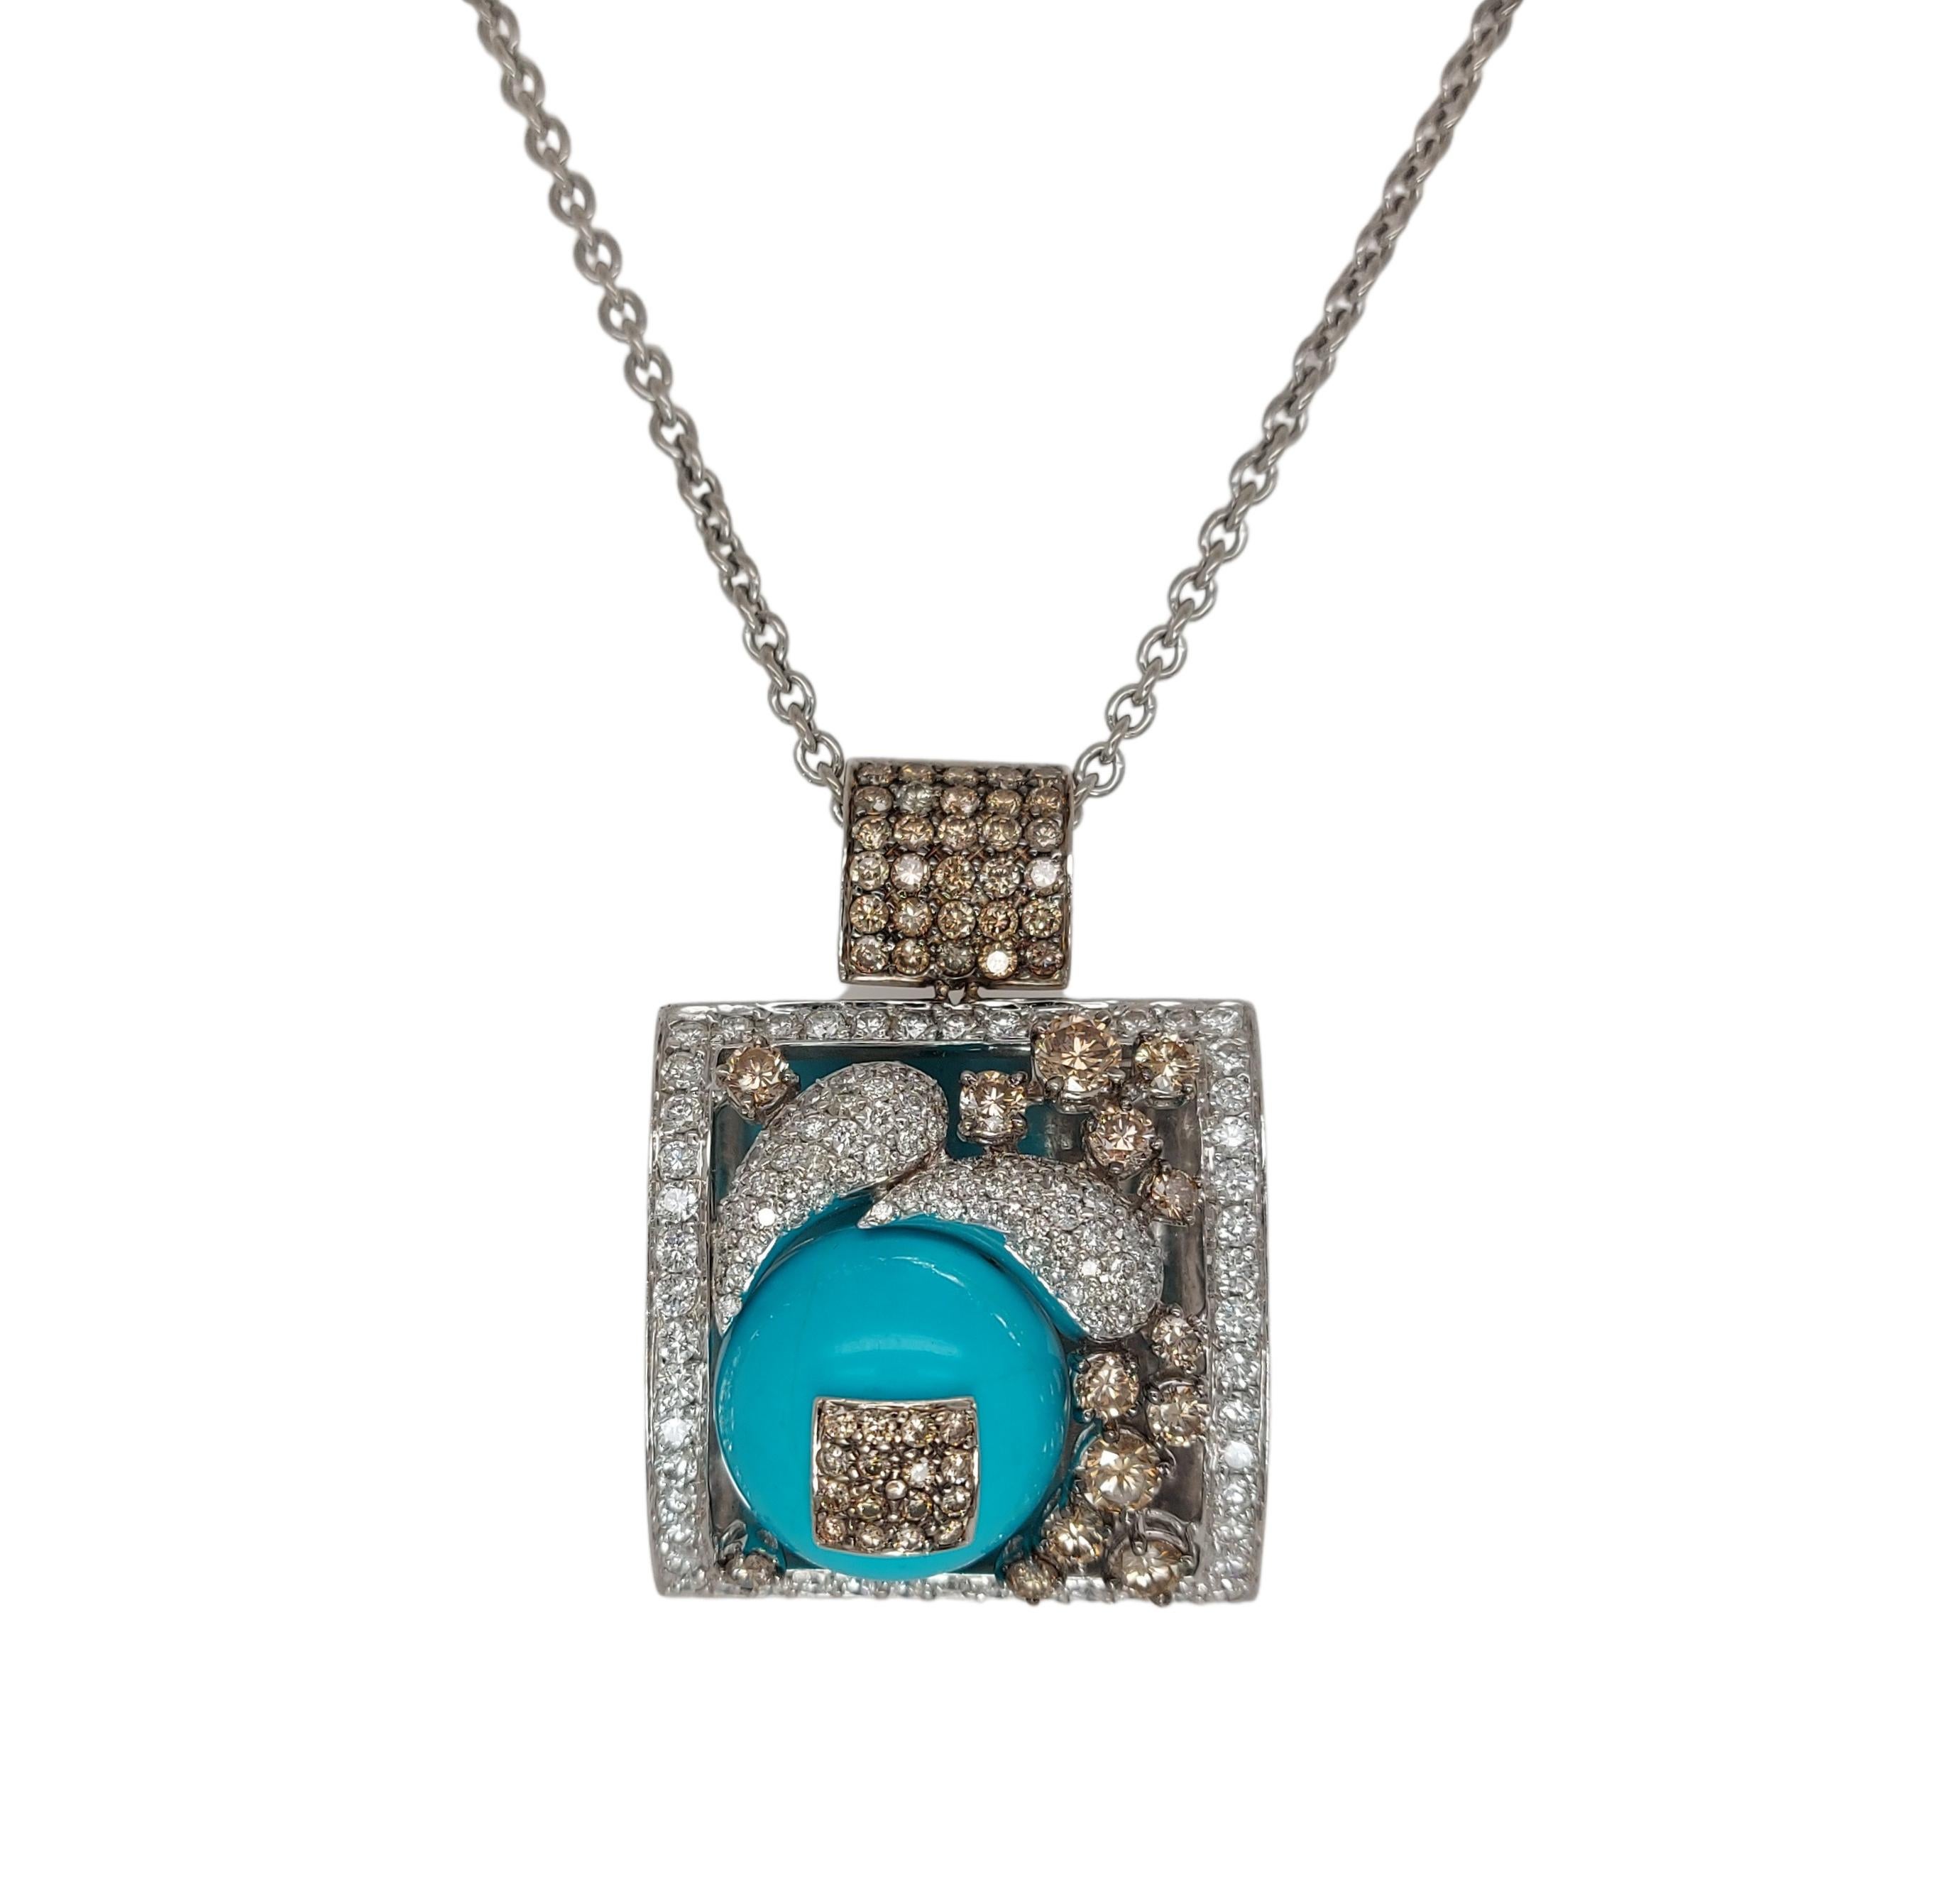 Women's or Men's Stunning 18kt White Gold Pendant / Necklace with Turquoise and Diamonds